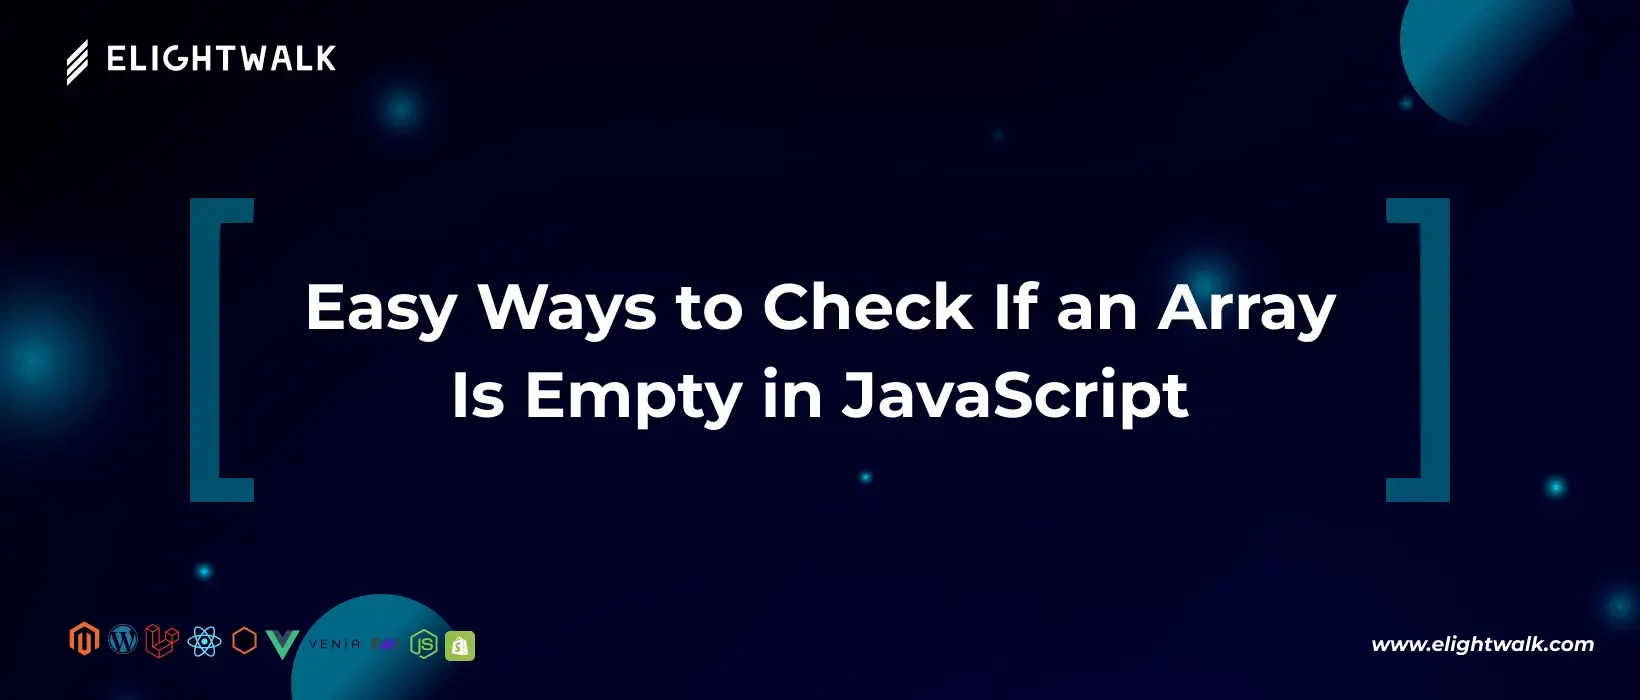 Check if an array is empty in JavaScript